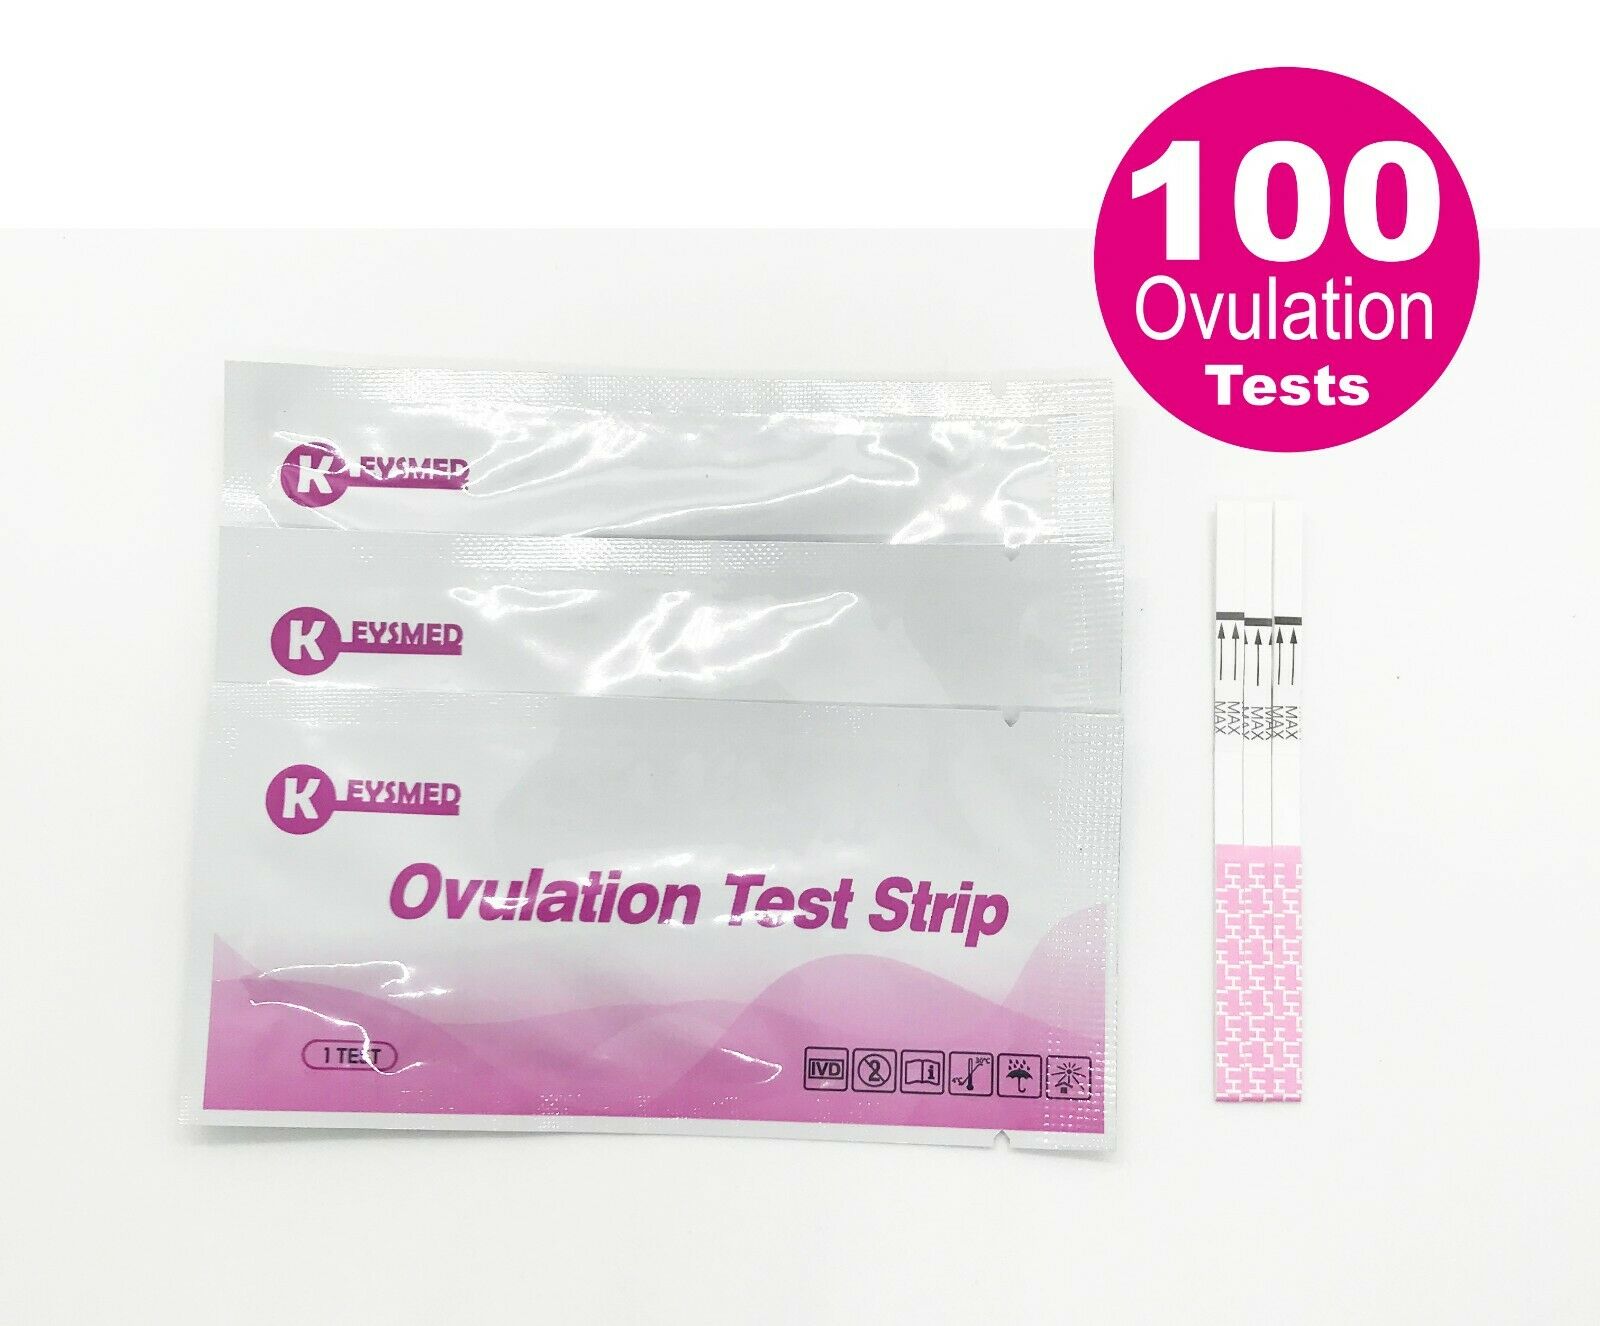 Keysmed One Step Ovulation (lh) Test Strips, 100-count Expiration Date 12/6/2022